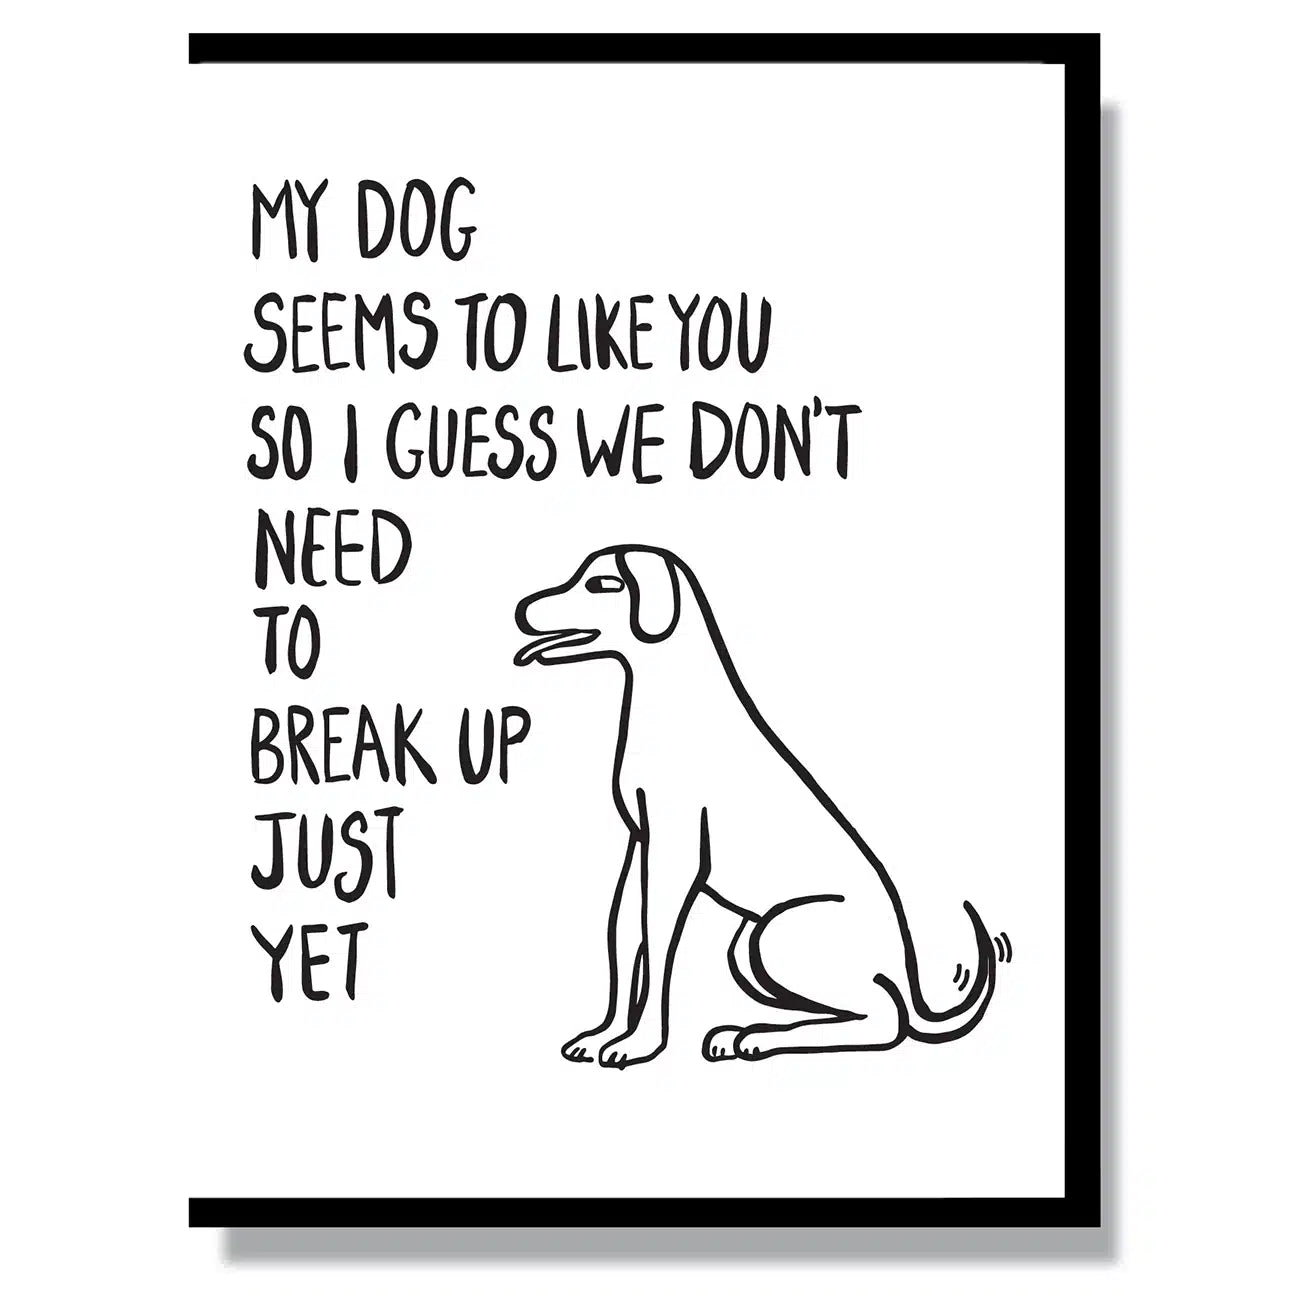 Dog-themed Greeting Card - My Dog Seems to Like You, So I Guess we Don't Need to Break up Just Yet